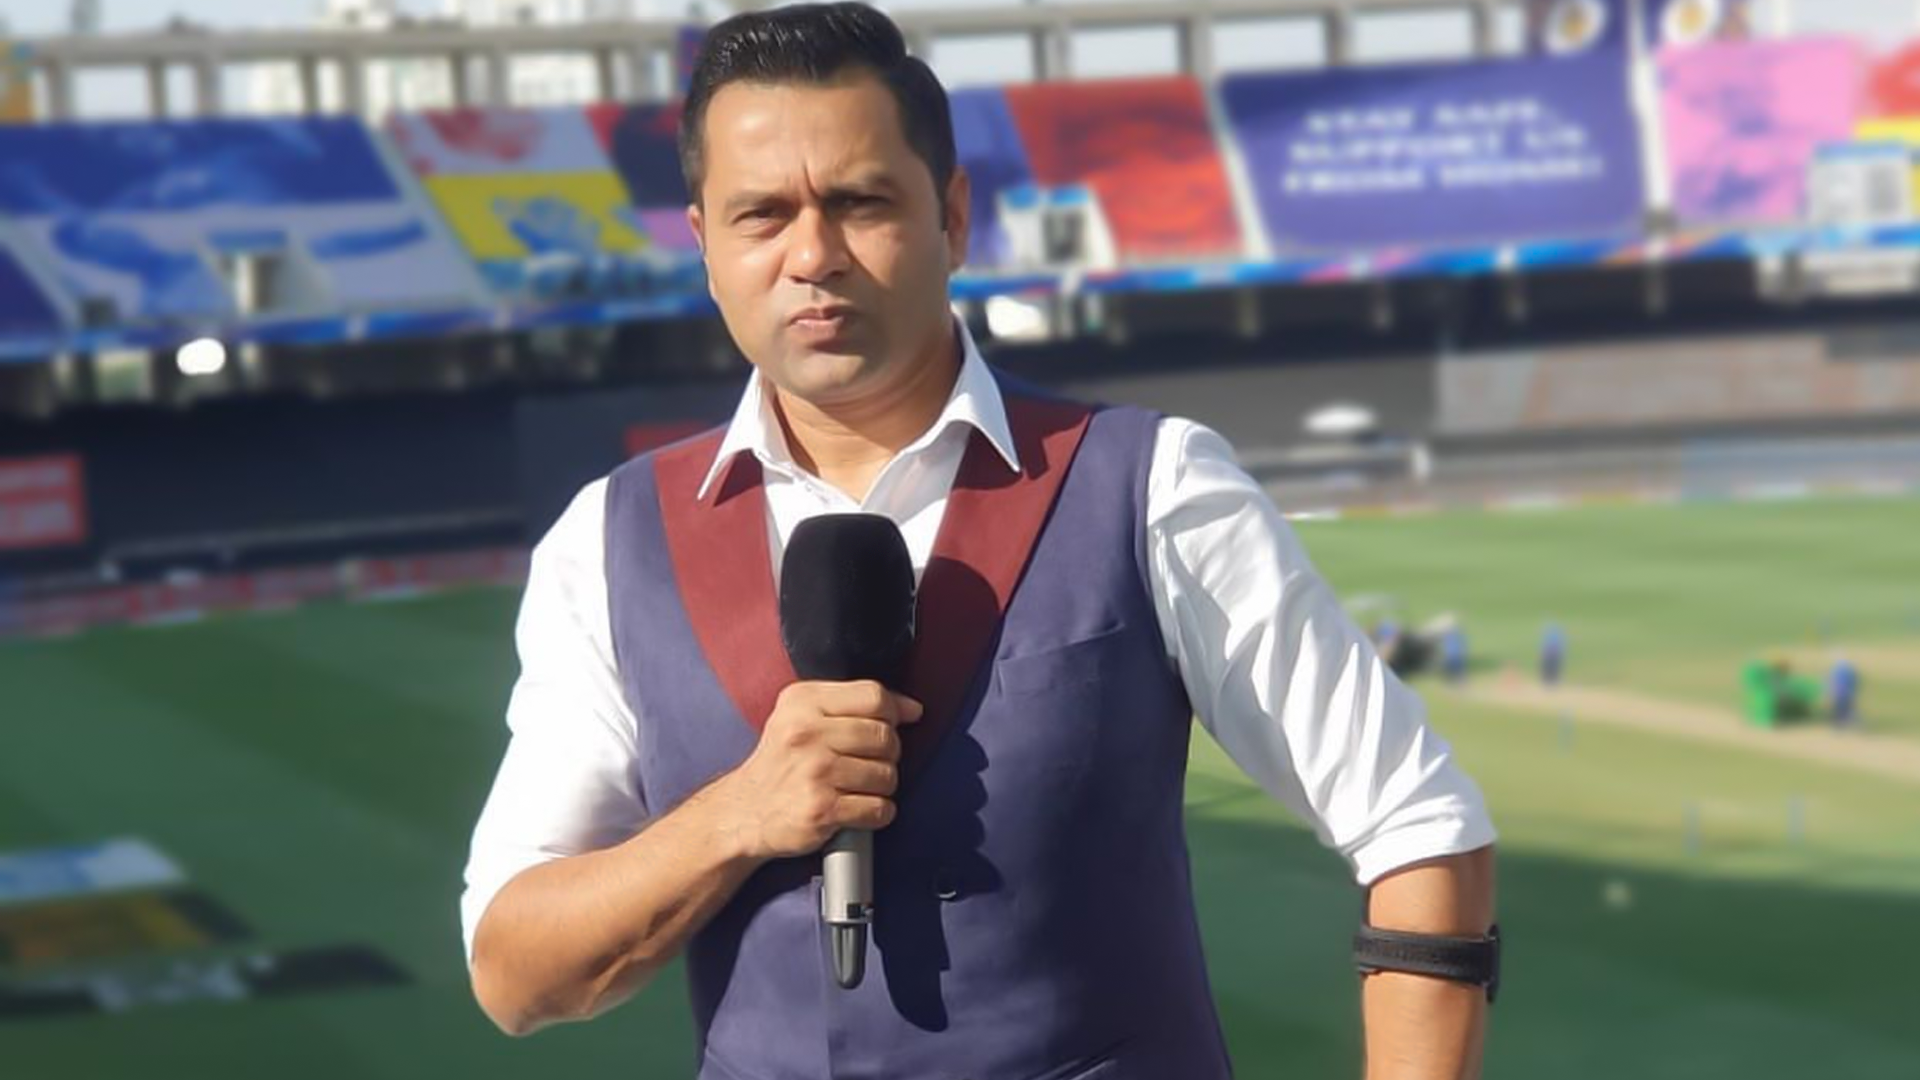 'There Are Only 2 Matches Left Now And If India Is Unable To Find Out About His Form, They Will Be In Trouble, Aakash Chopra Marks The Biggest Concern For Team India